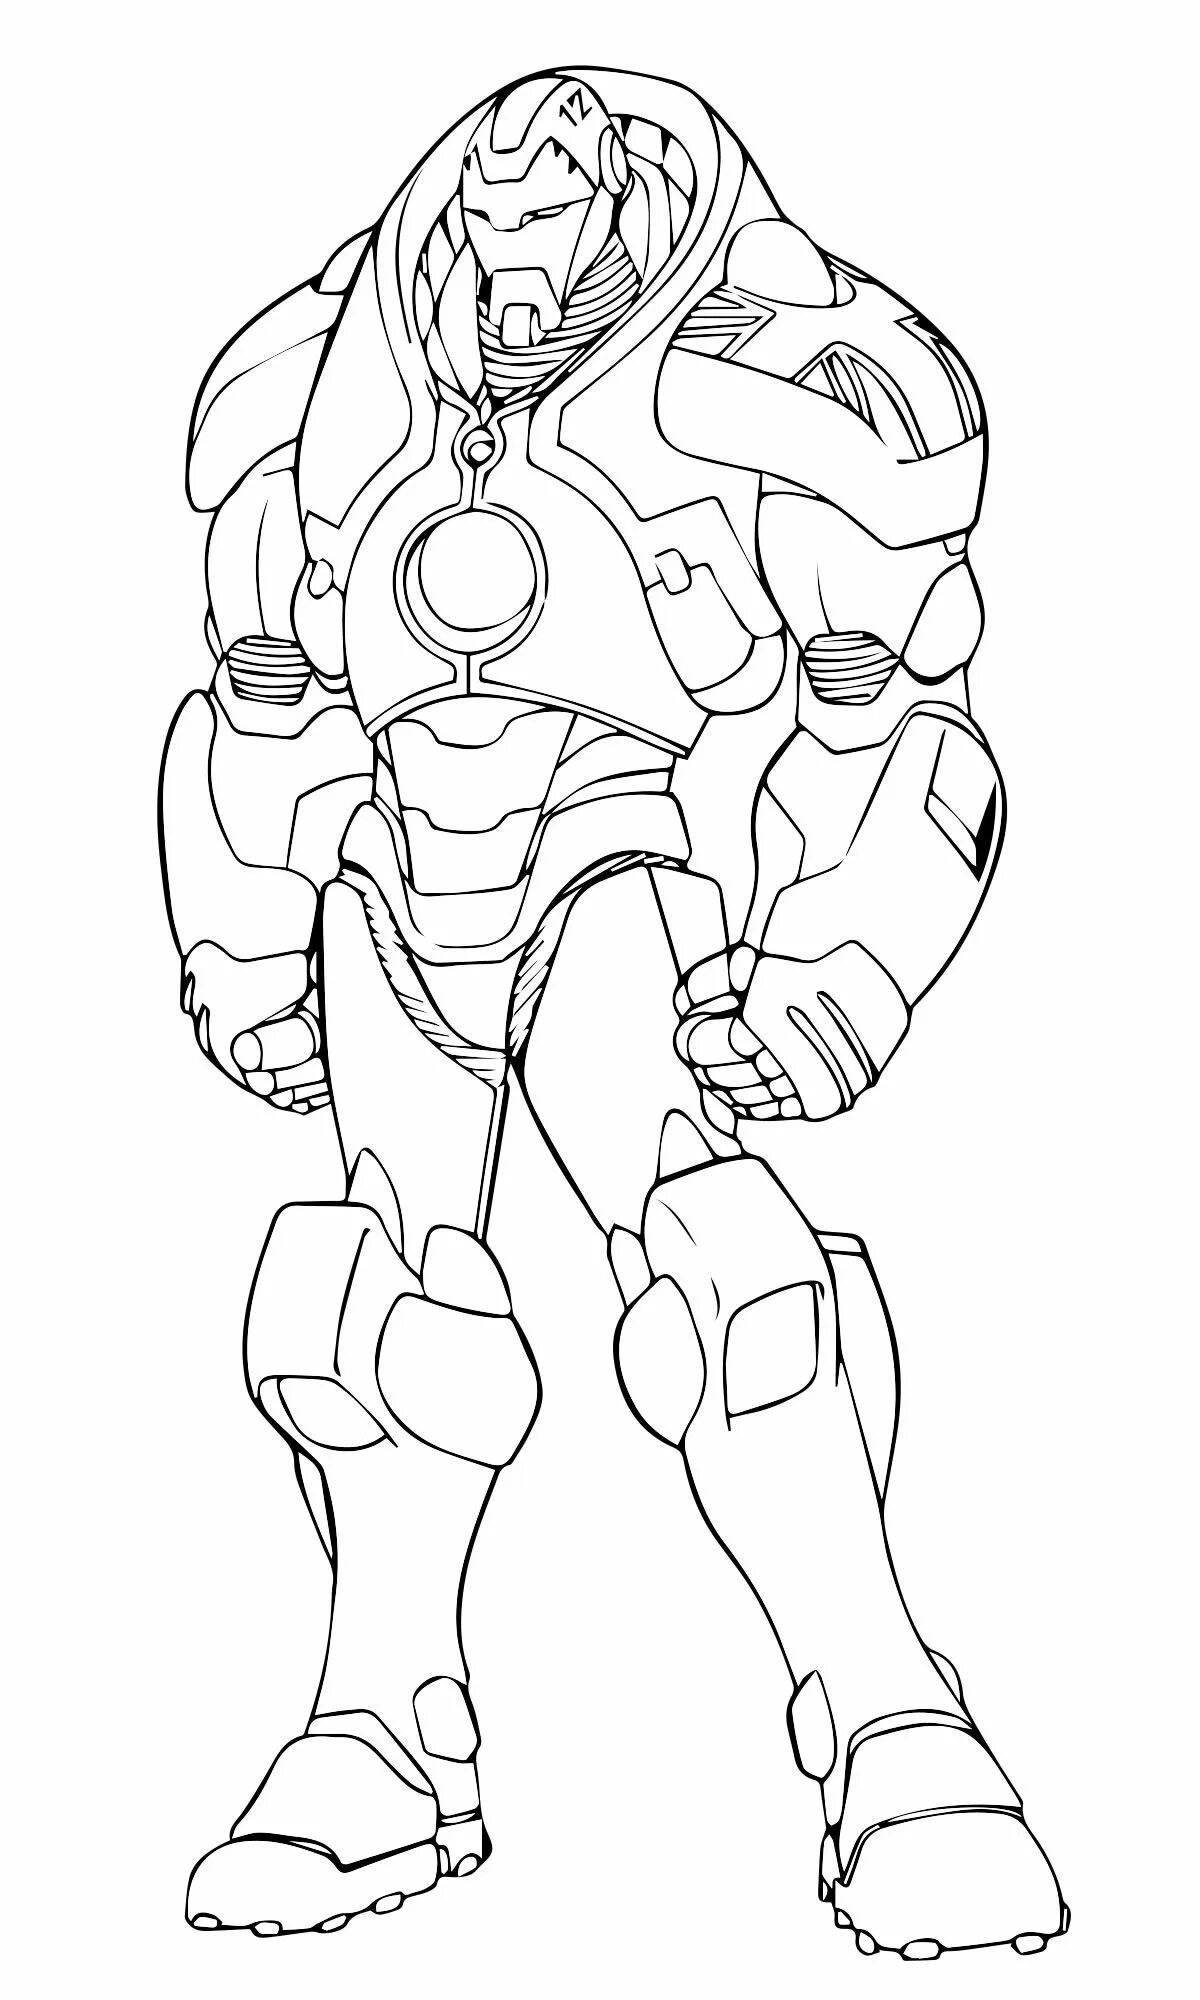 Iron Man brightly colored coloring page